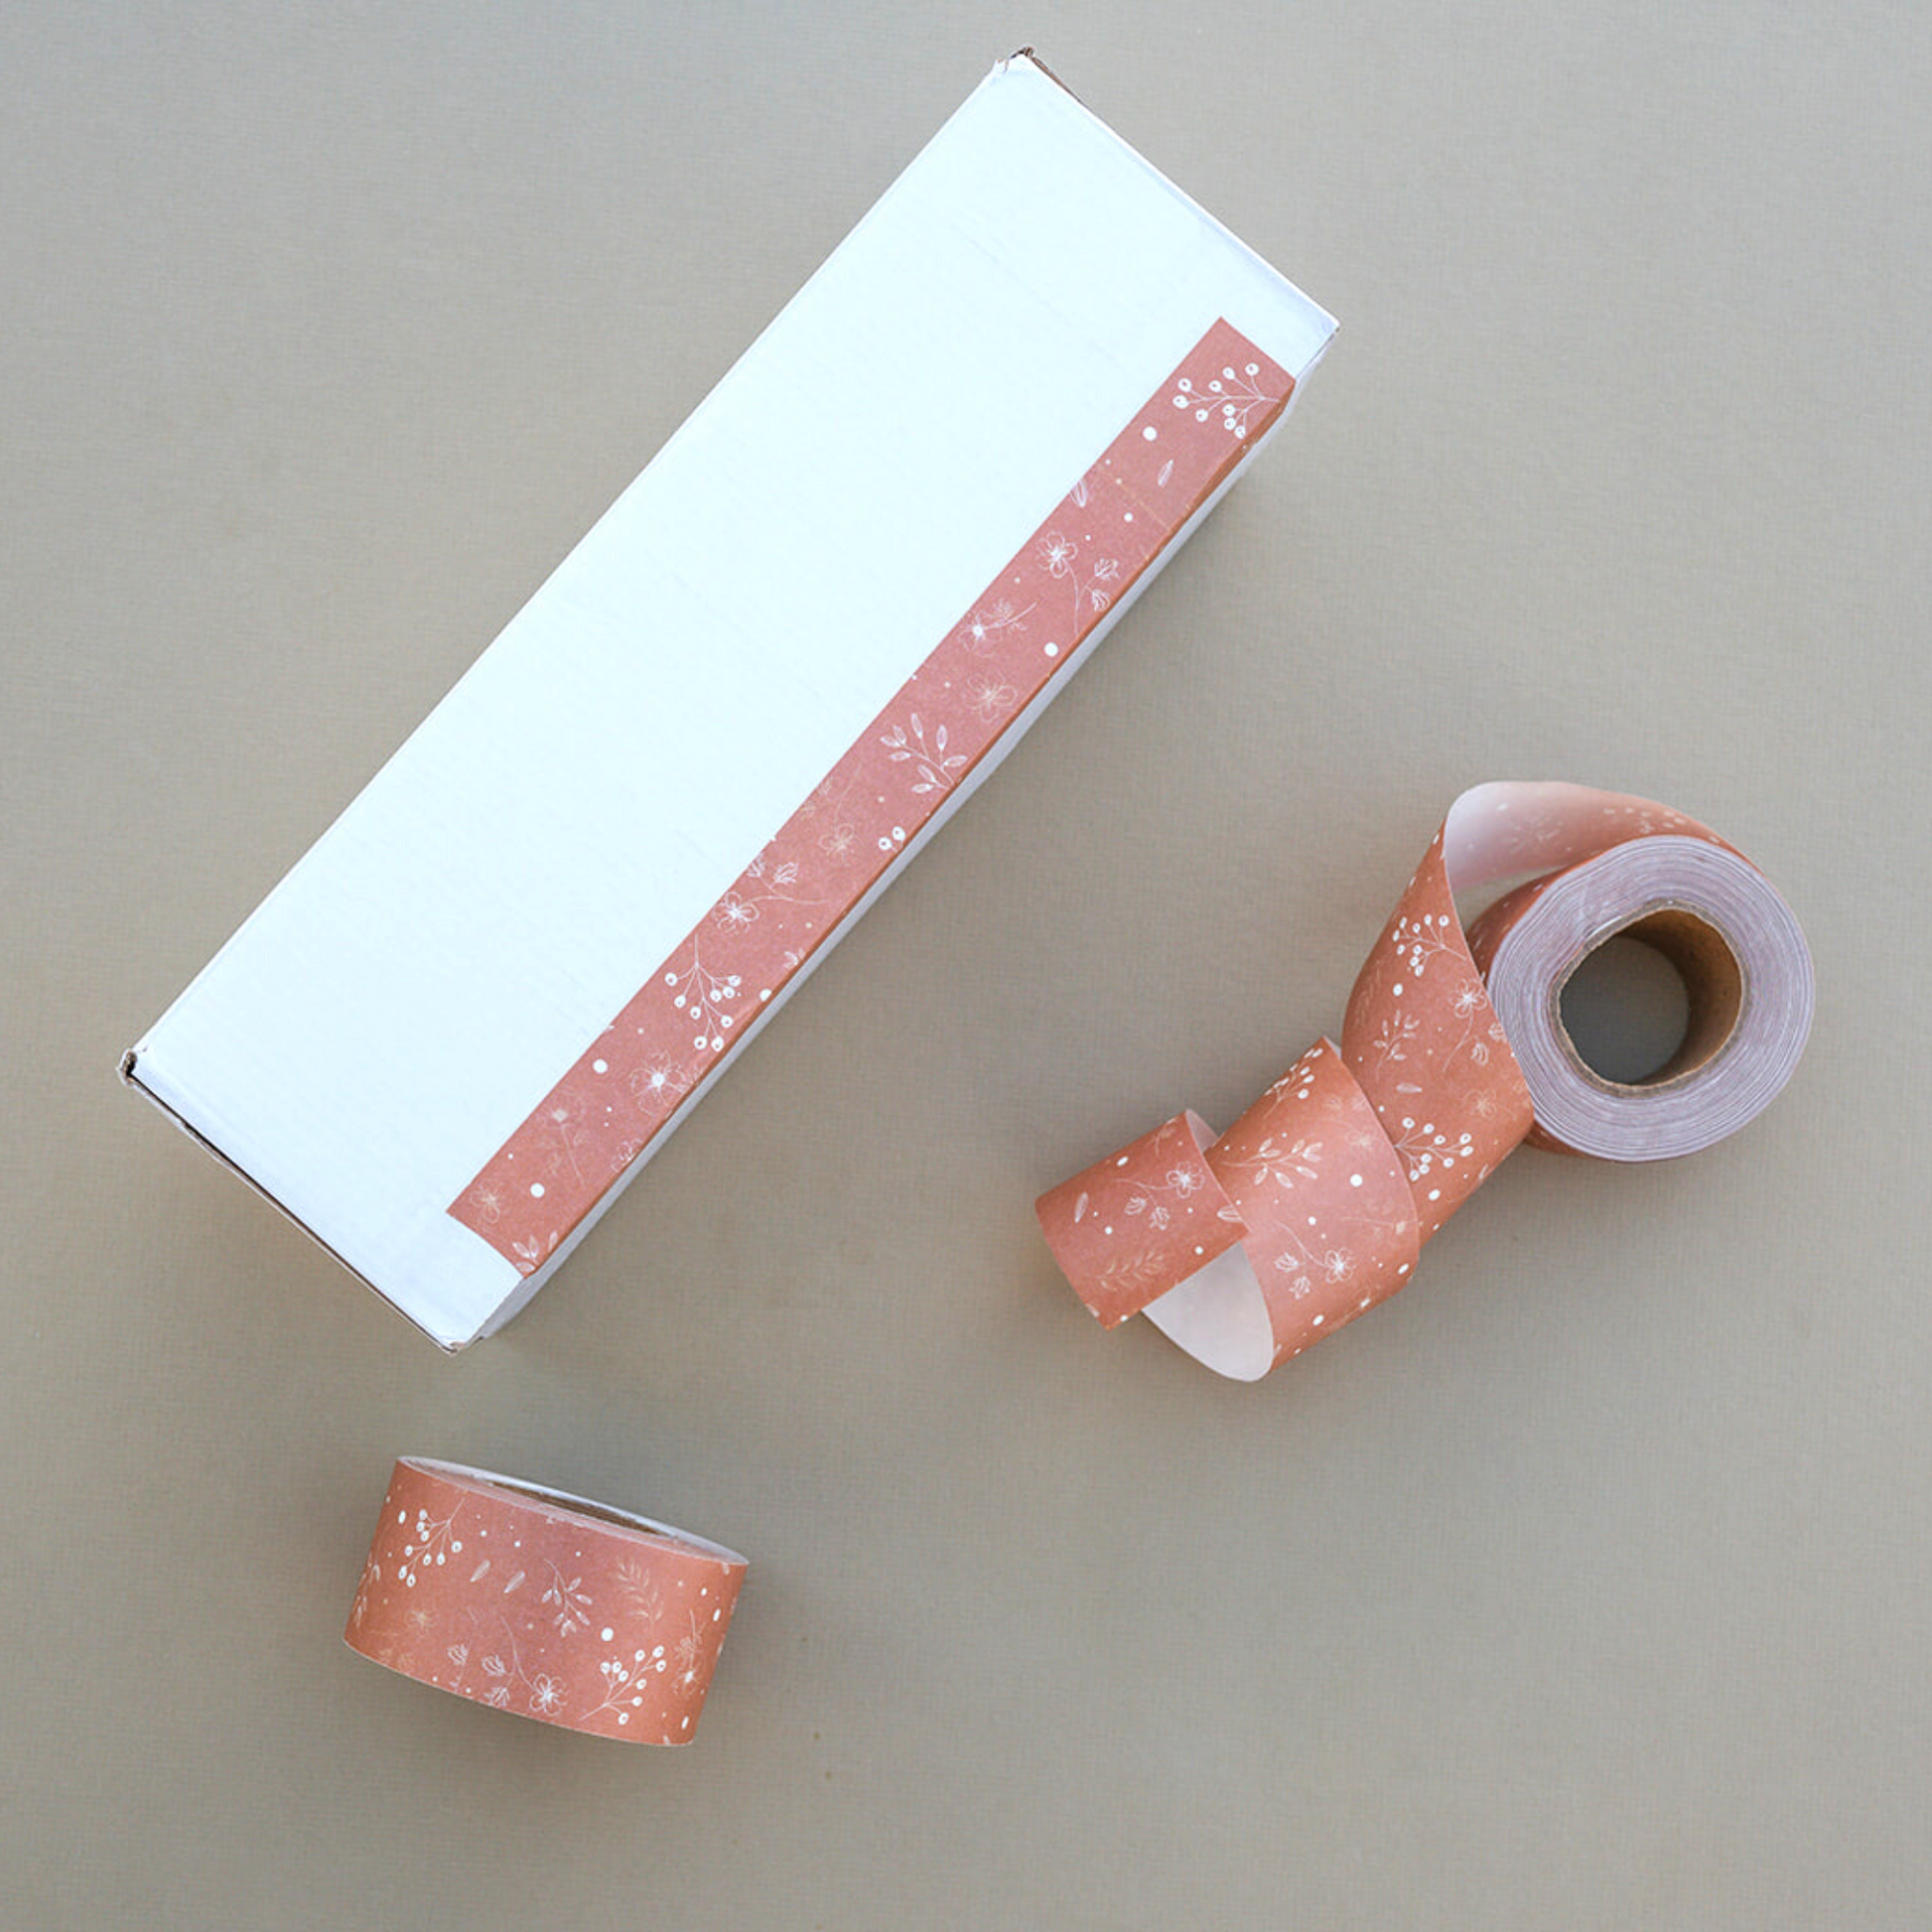 Floral Rosy Brown washi tape by impack.co.